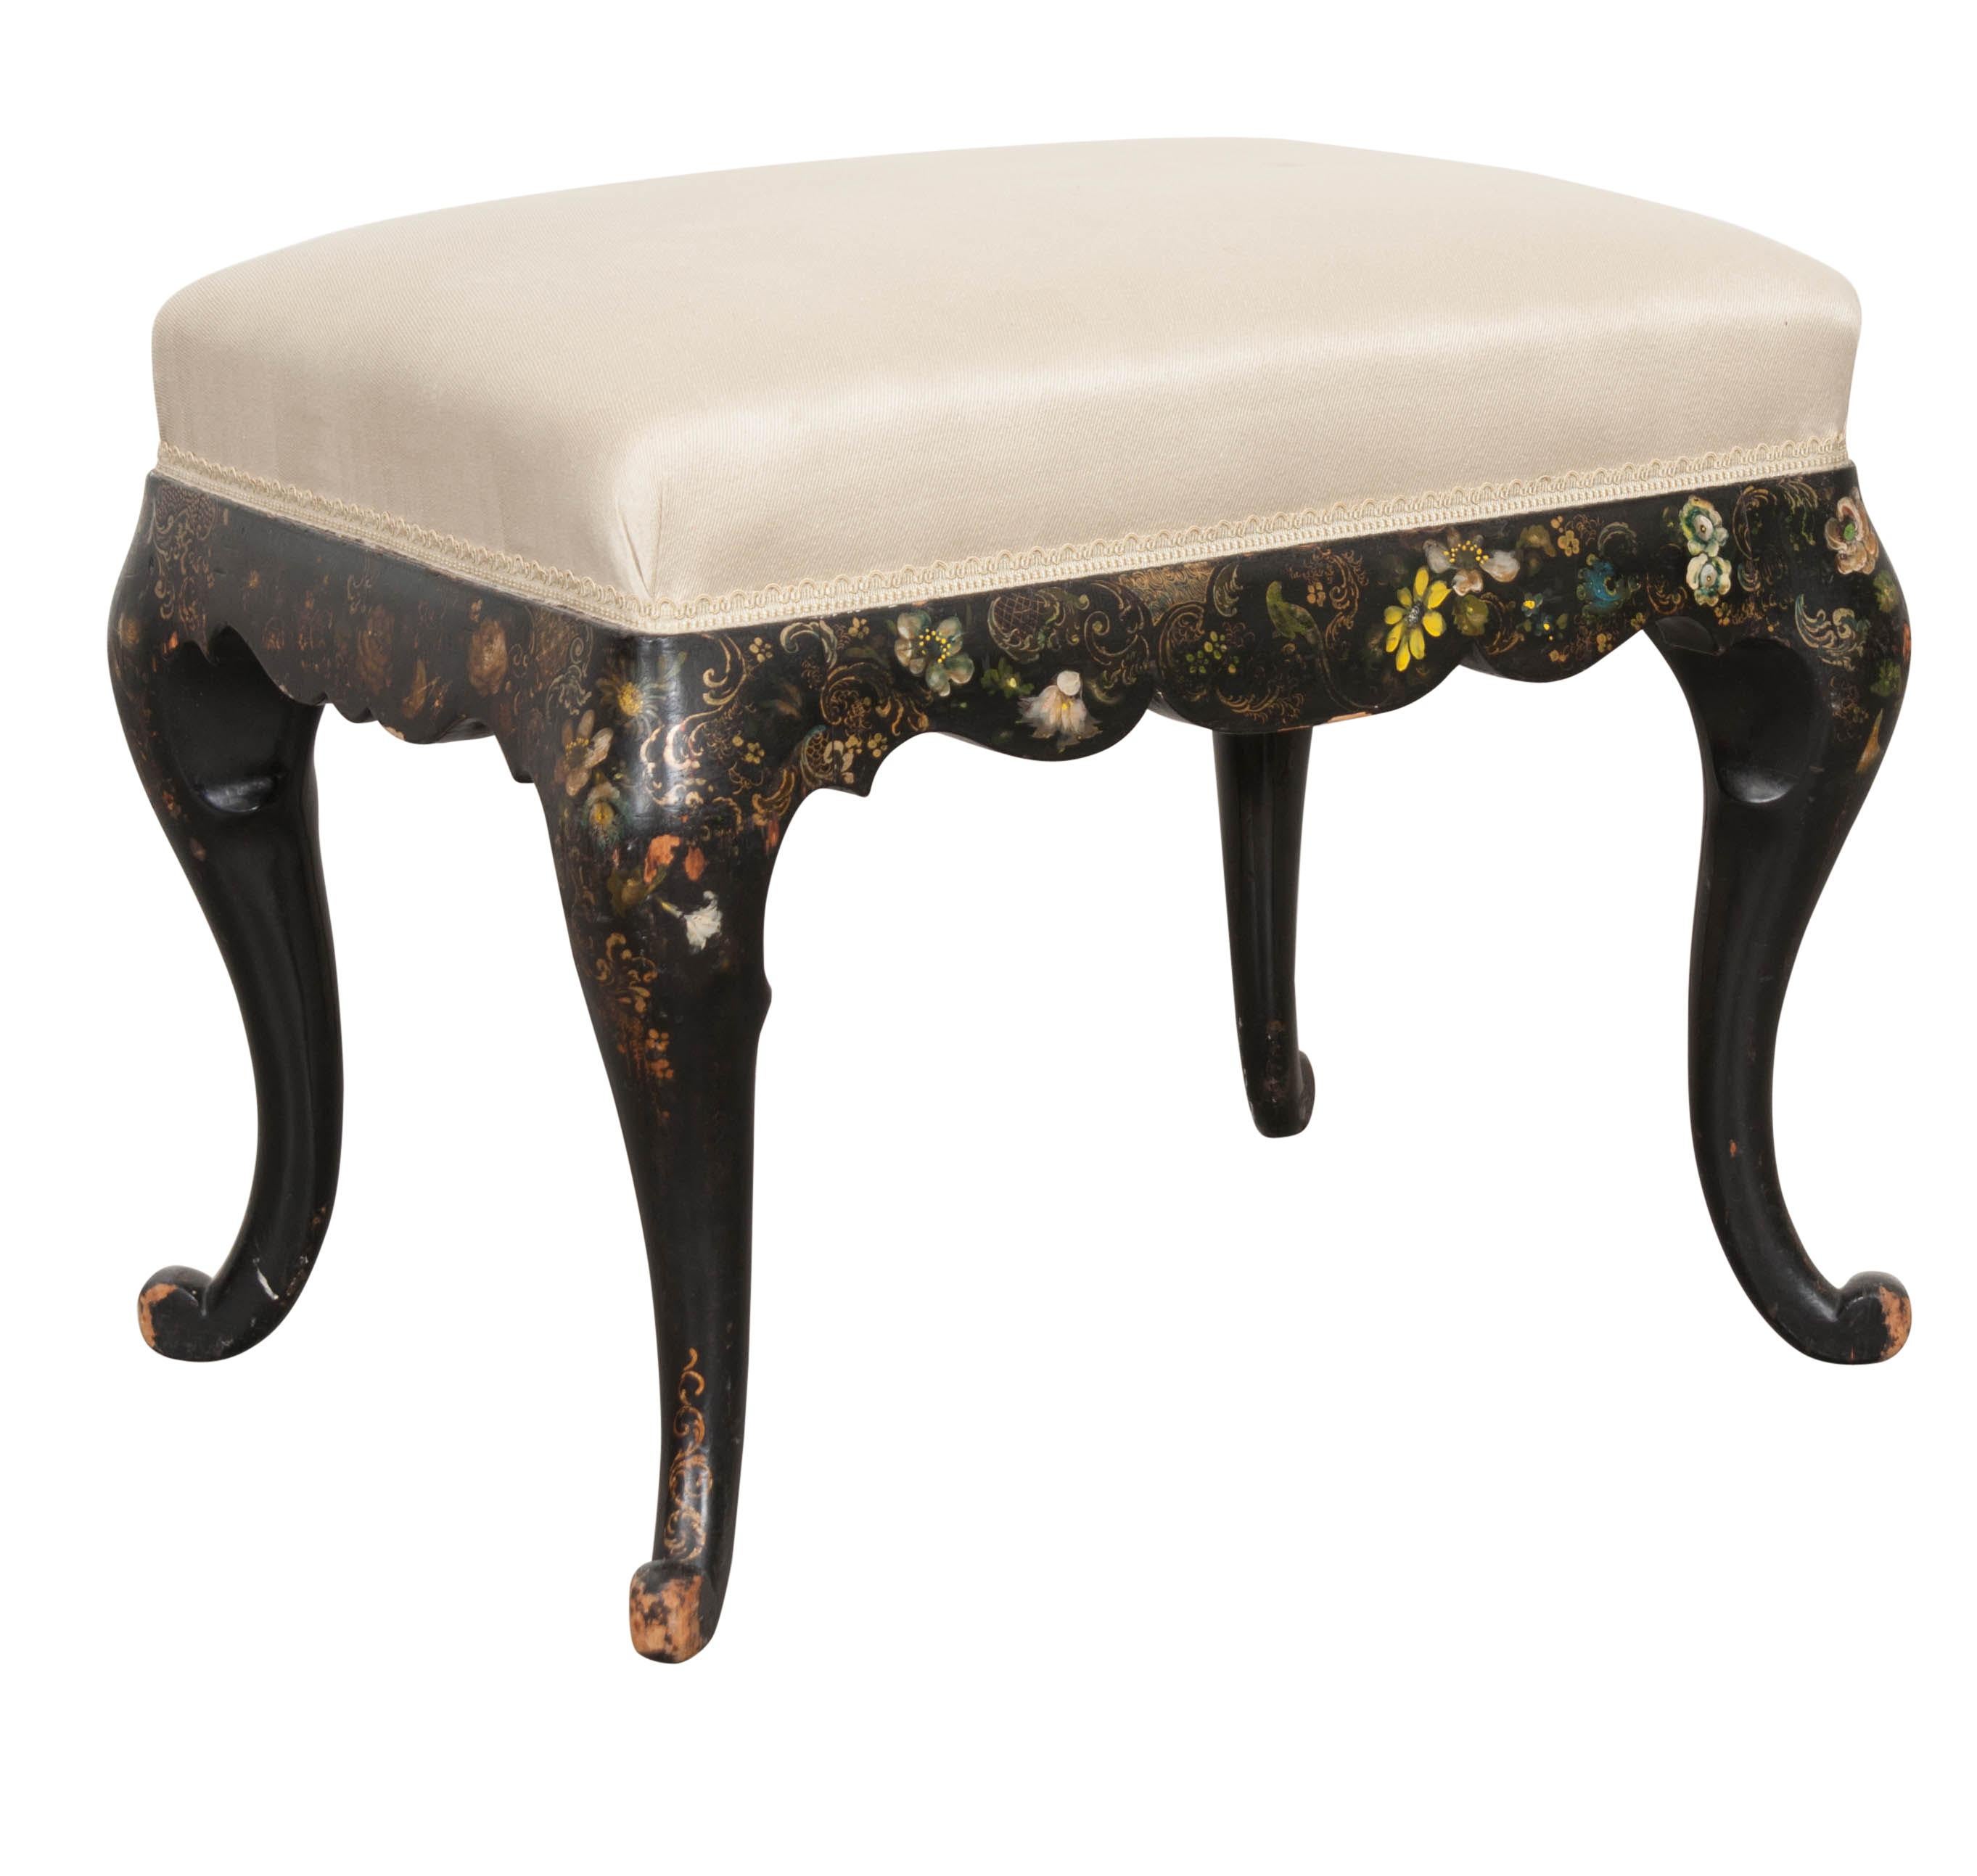 Early-20th Century English Chinoiserie Hand-Painted and Cabriole Leg Stool For Sale